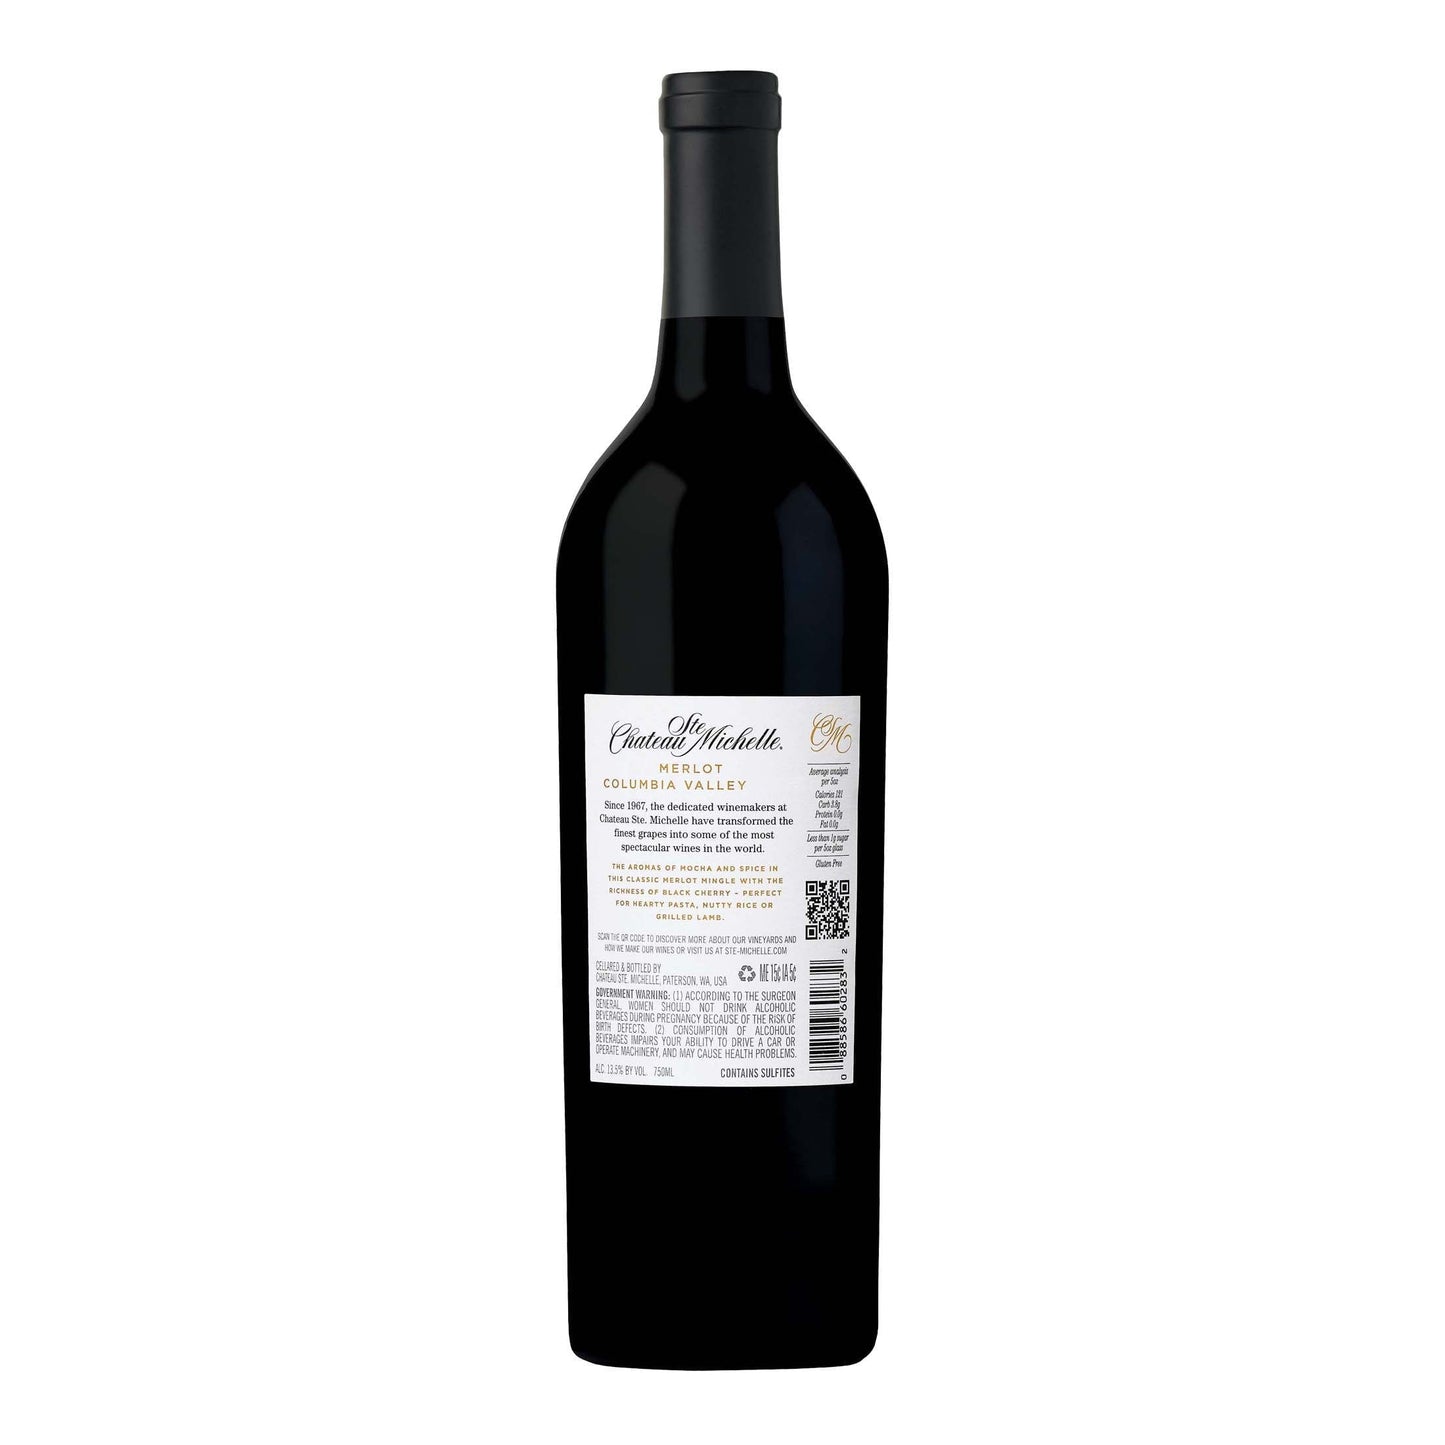 Chateau Ste. Michelle Columbia Valley Merlot Wine Red Wine, 750 ml Bottle, 13.5% ABV